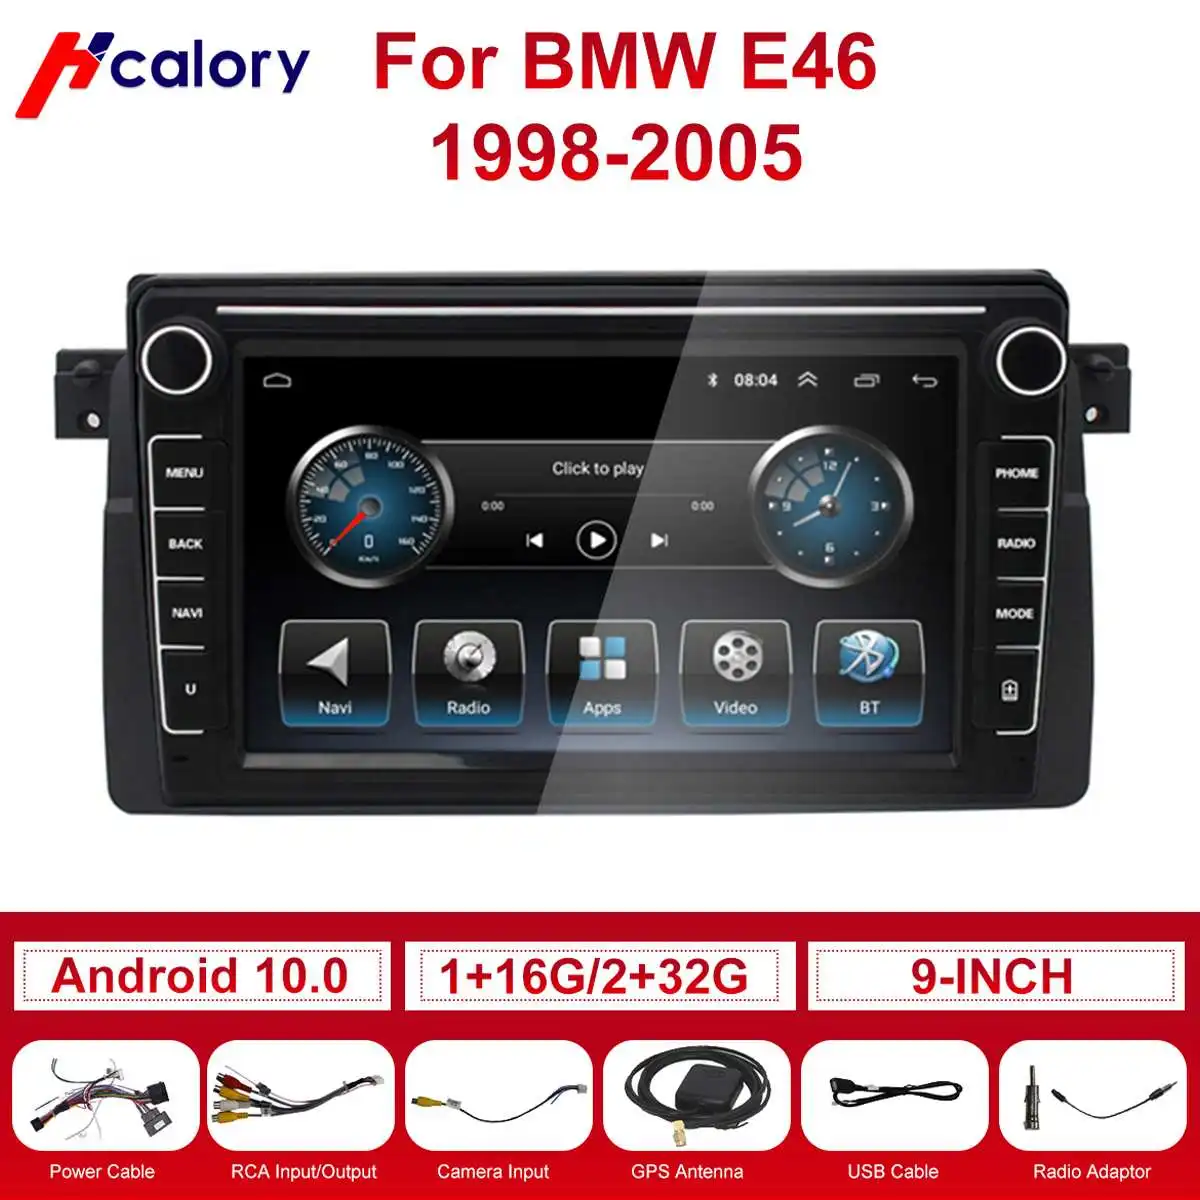 

9-inch Android car radio for BMW E46 models Android navigation car GPS integrated machine reversing image multimedia GPS DSP